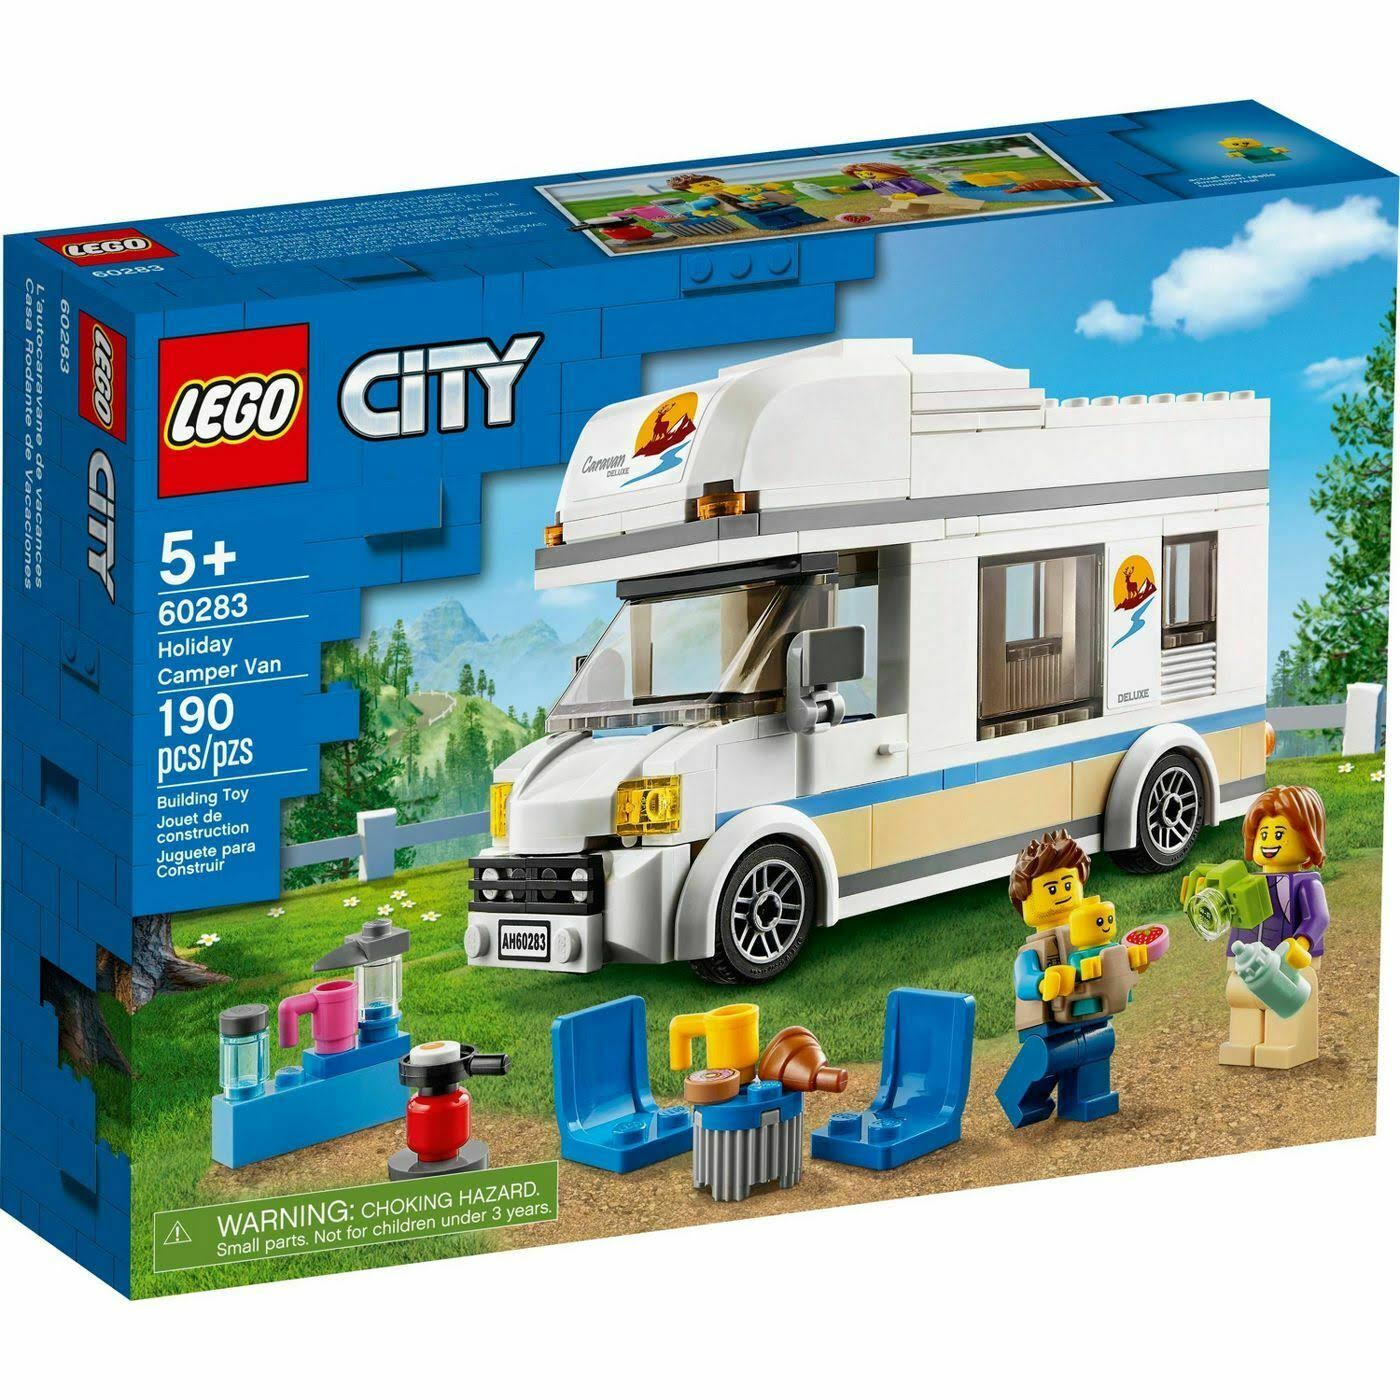 Lego 60283 City Holiday Camper Van Building Set New with Sealed Box